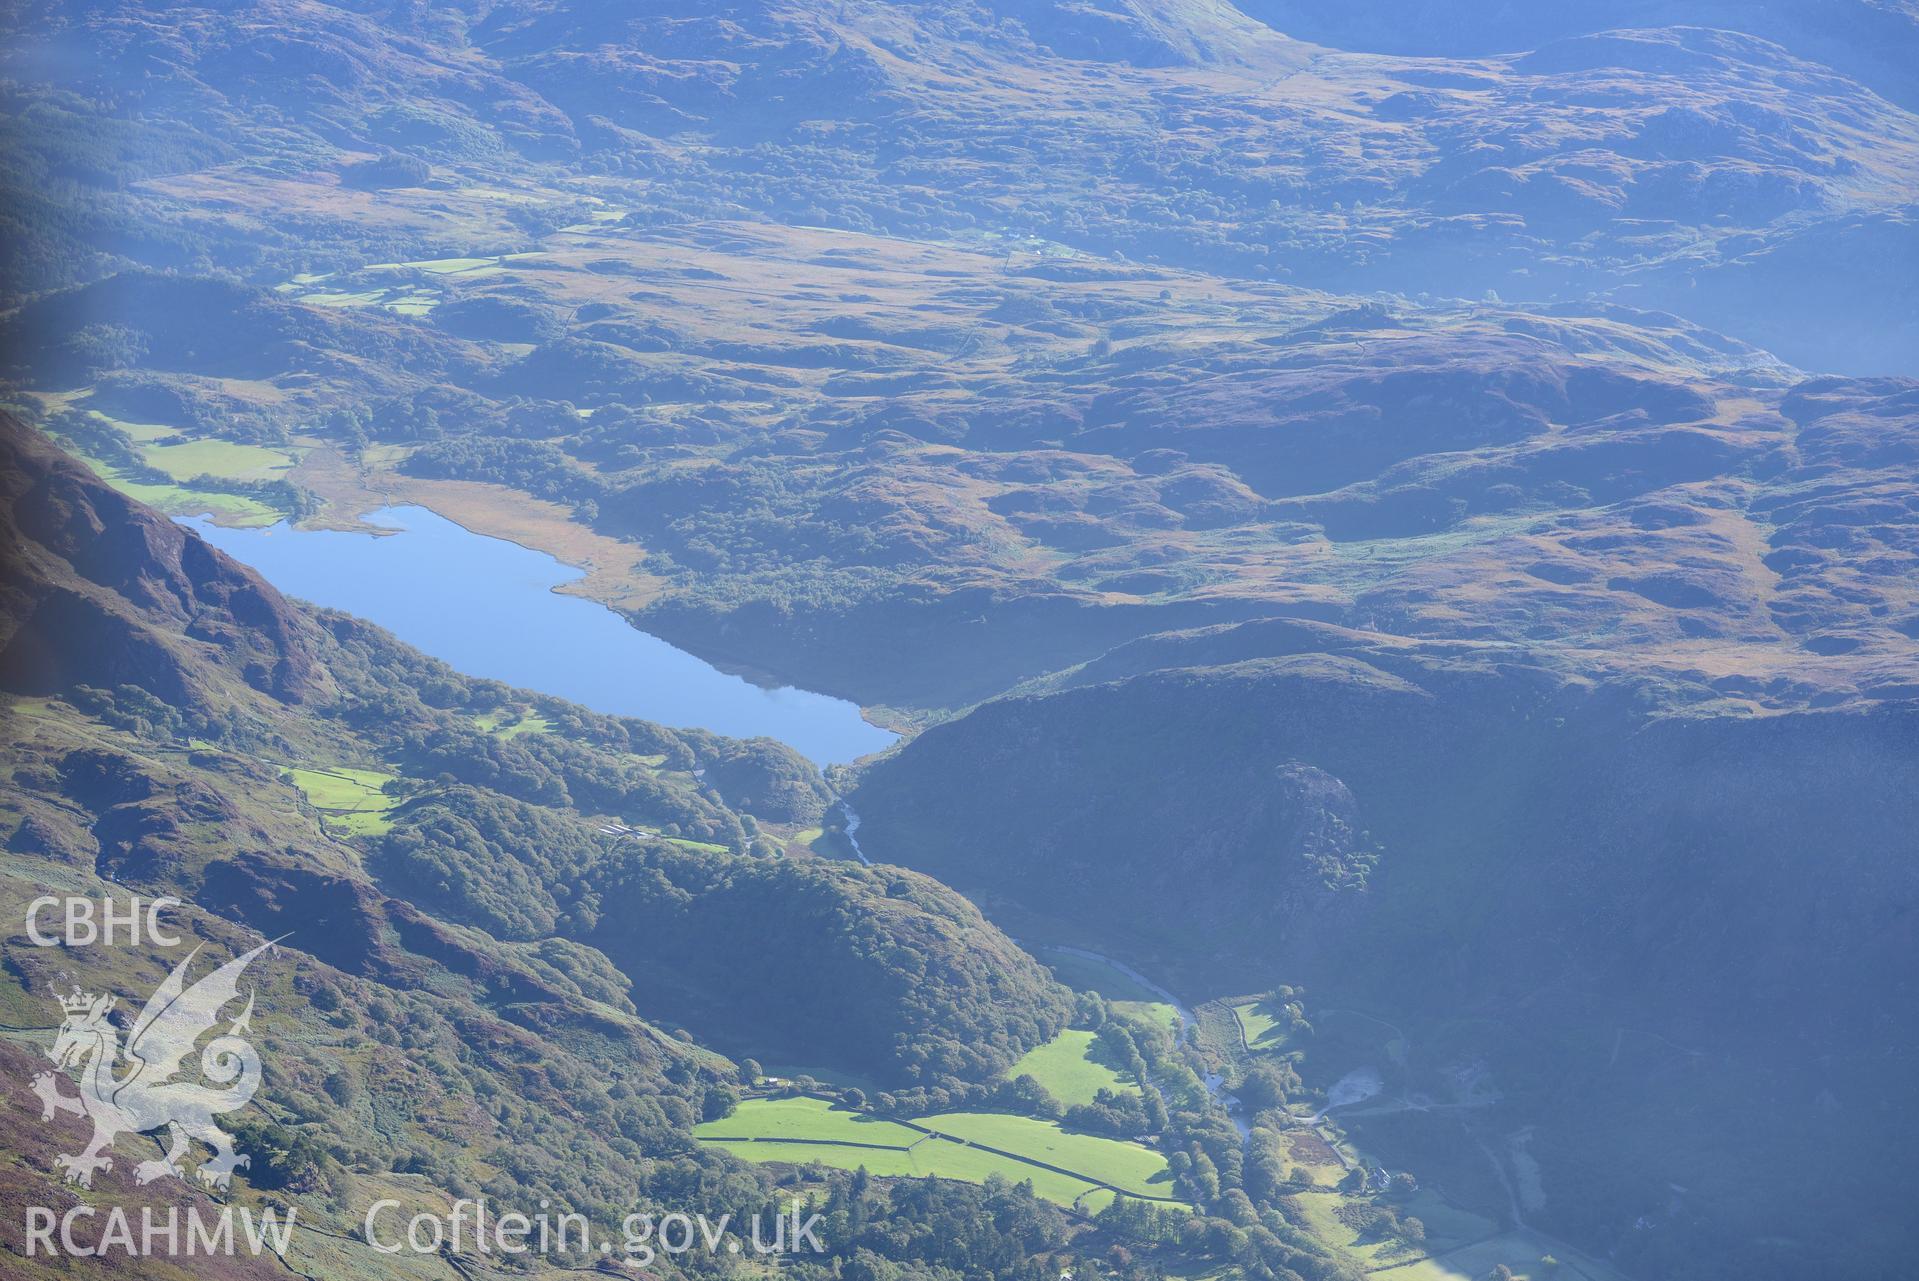 Dinas Emrys hillfort and Llyn Dinas near Beddgelert. Oblique aerial photograph taken during the Royal Commission's programme of archaeological aerial reconnaissance by Toby Driver on 2nd October 2015.